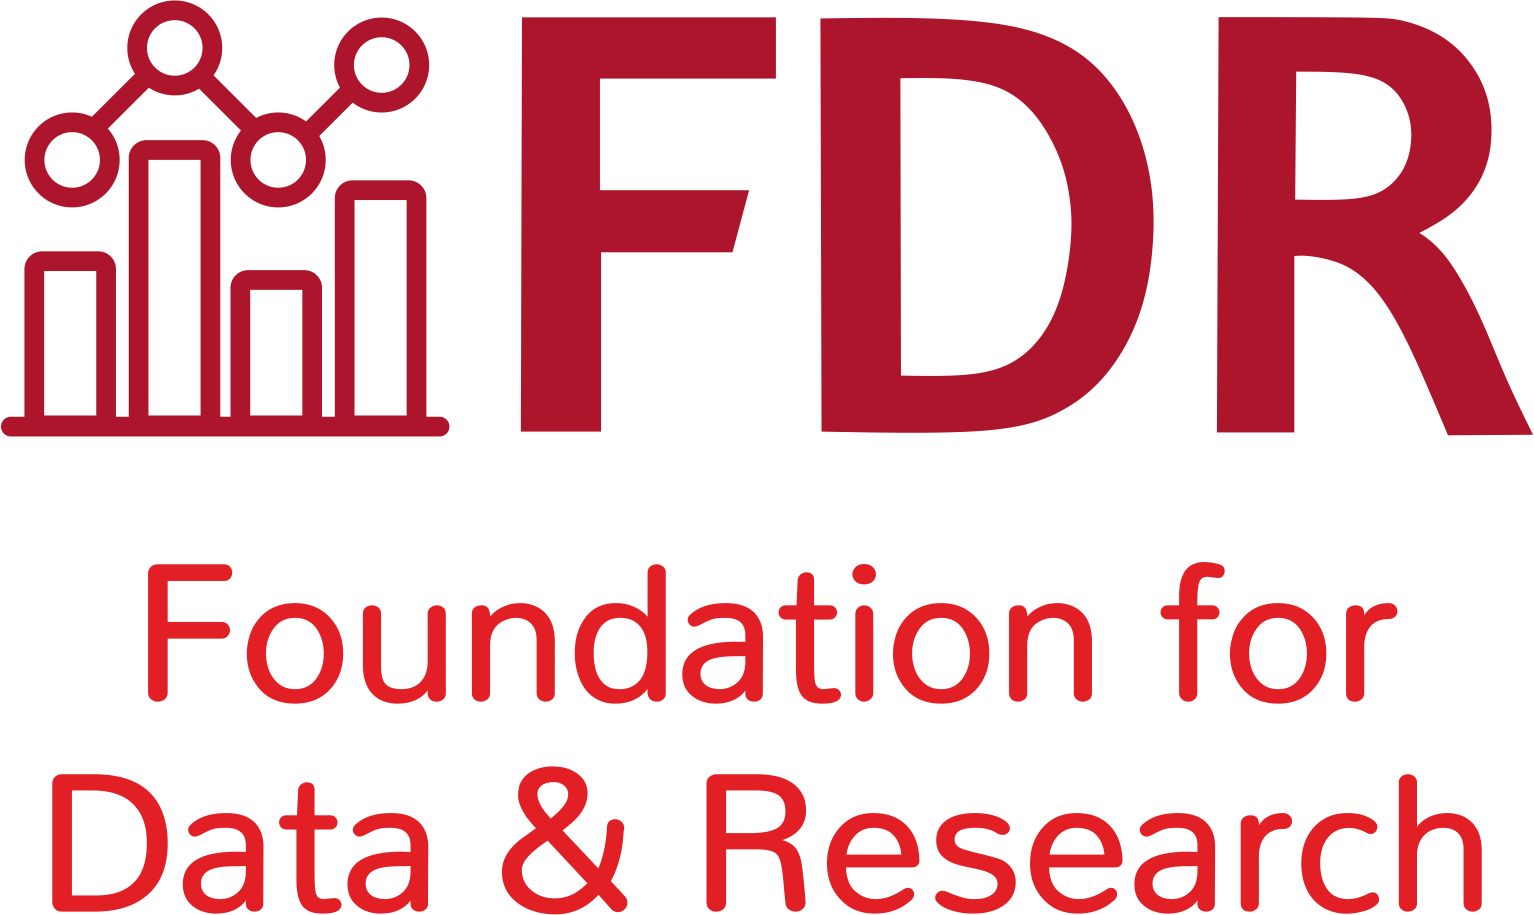 Foundation for Data & Research